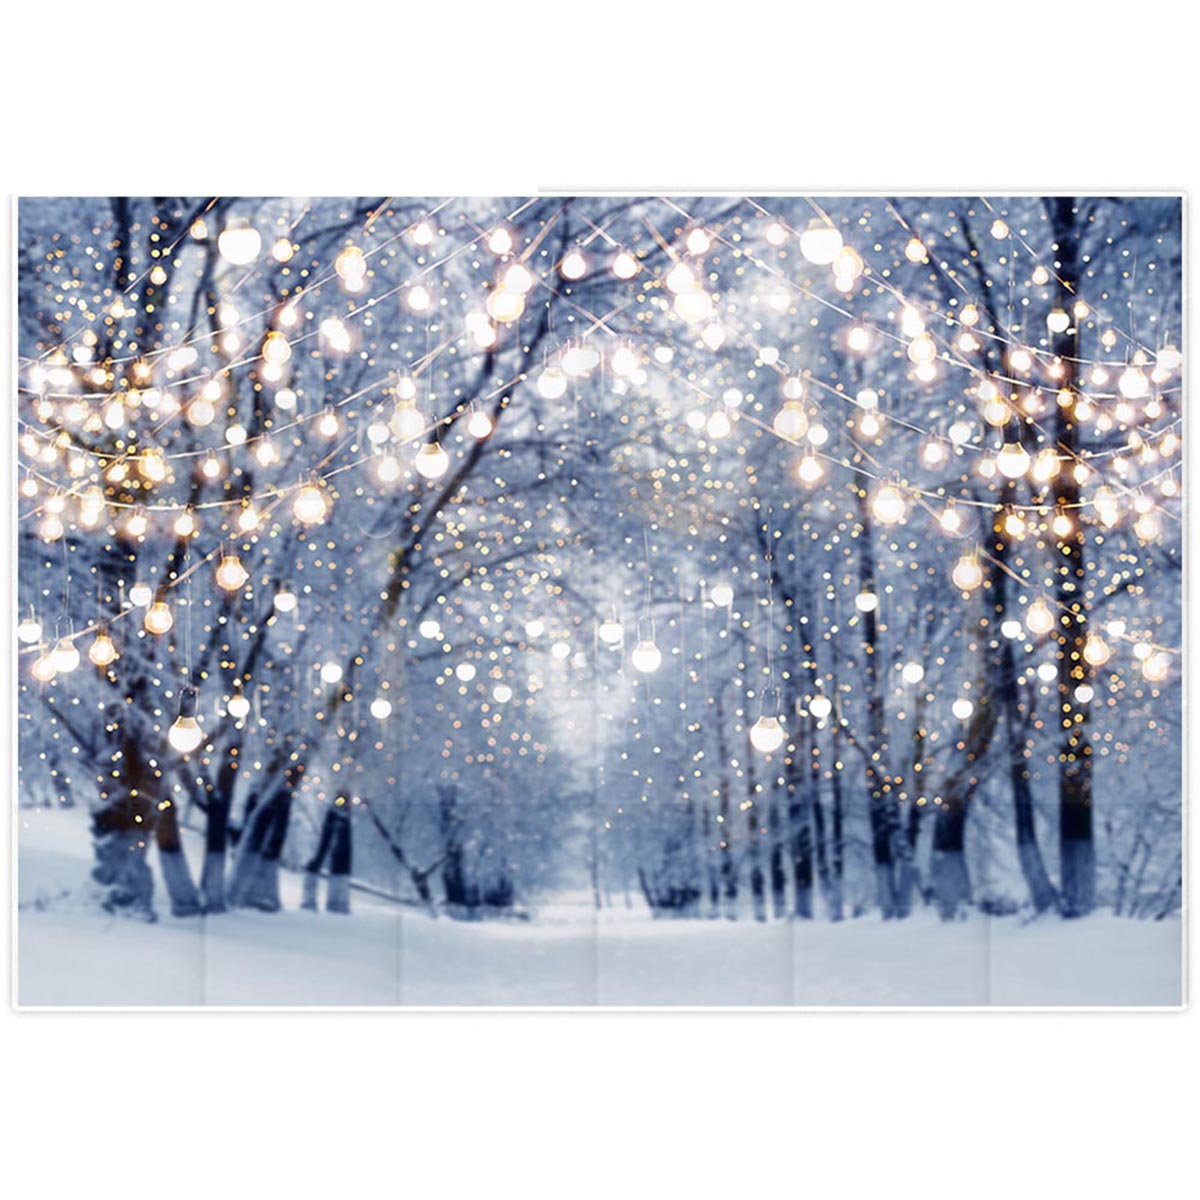 5x3FT-7x5FT-8x6FT-Light-Strip-Winter-Snow-Forest-Street-Photography-Backdrop-Background-Studio-Prop-1609475-2